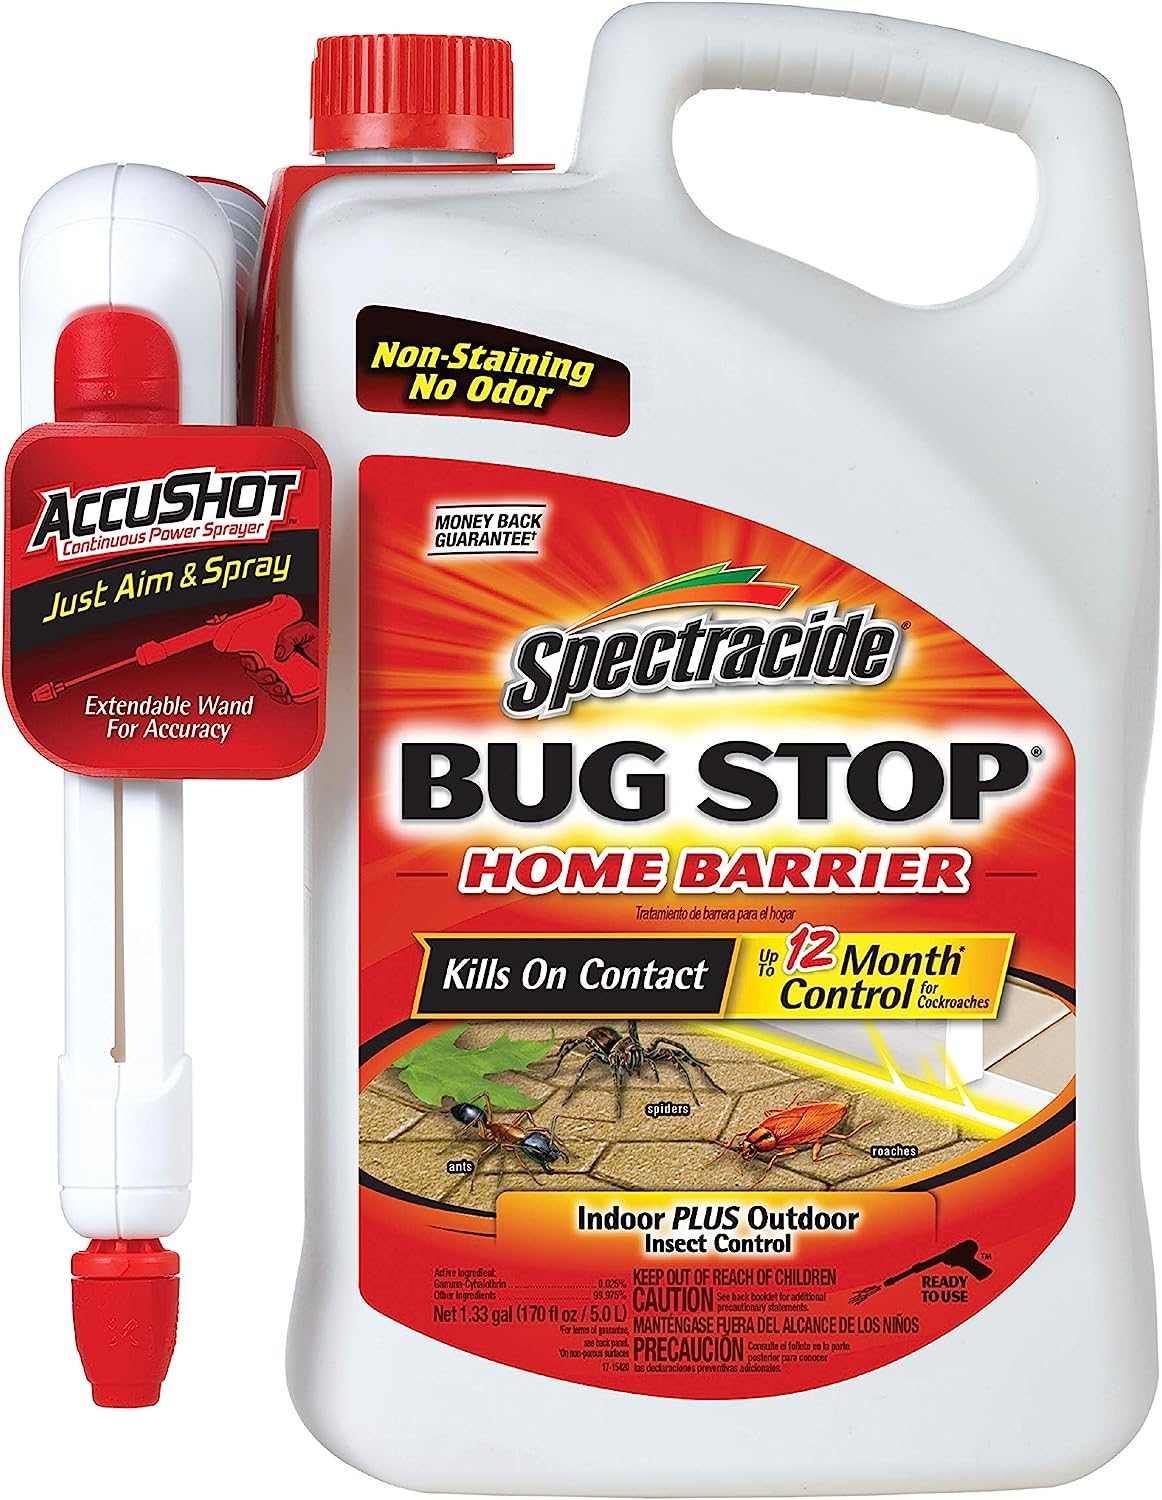 Spectracide Bug Stop Home Barrier, Kills Ants, Roaches [...]